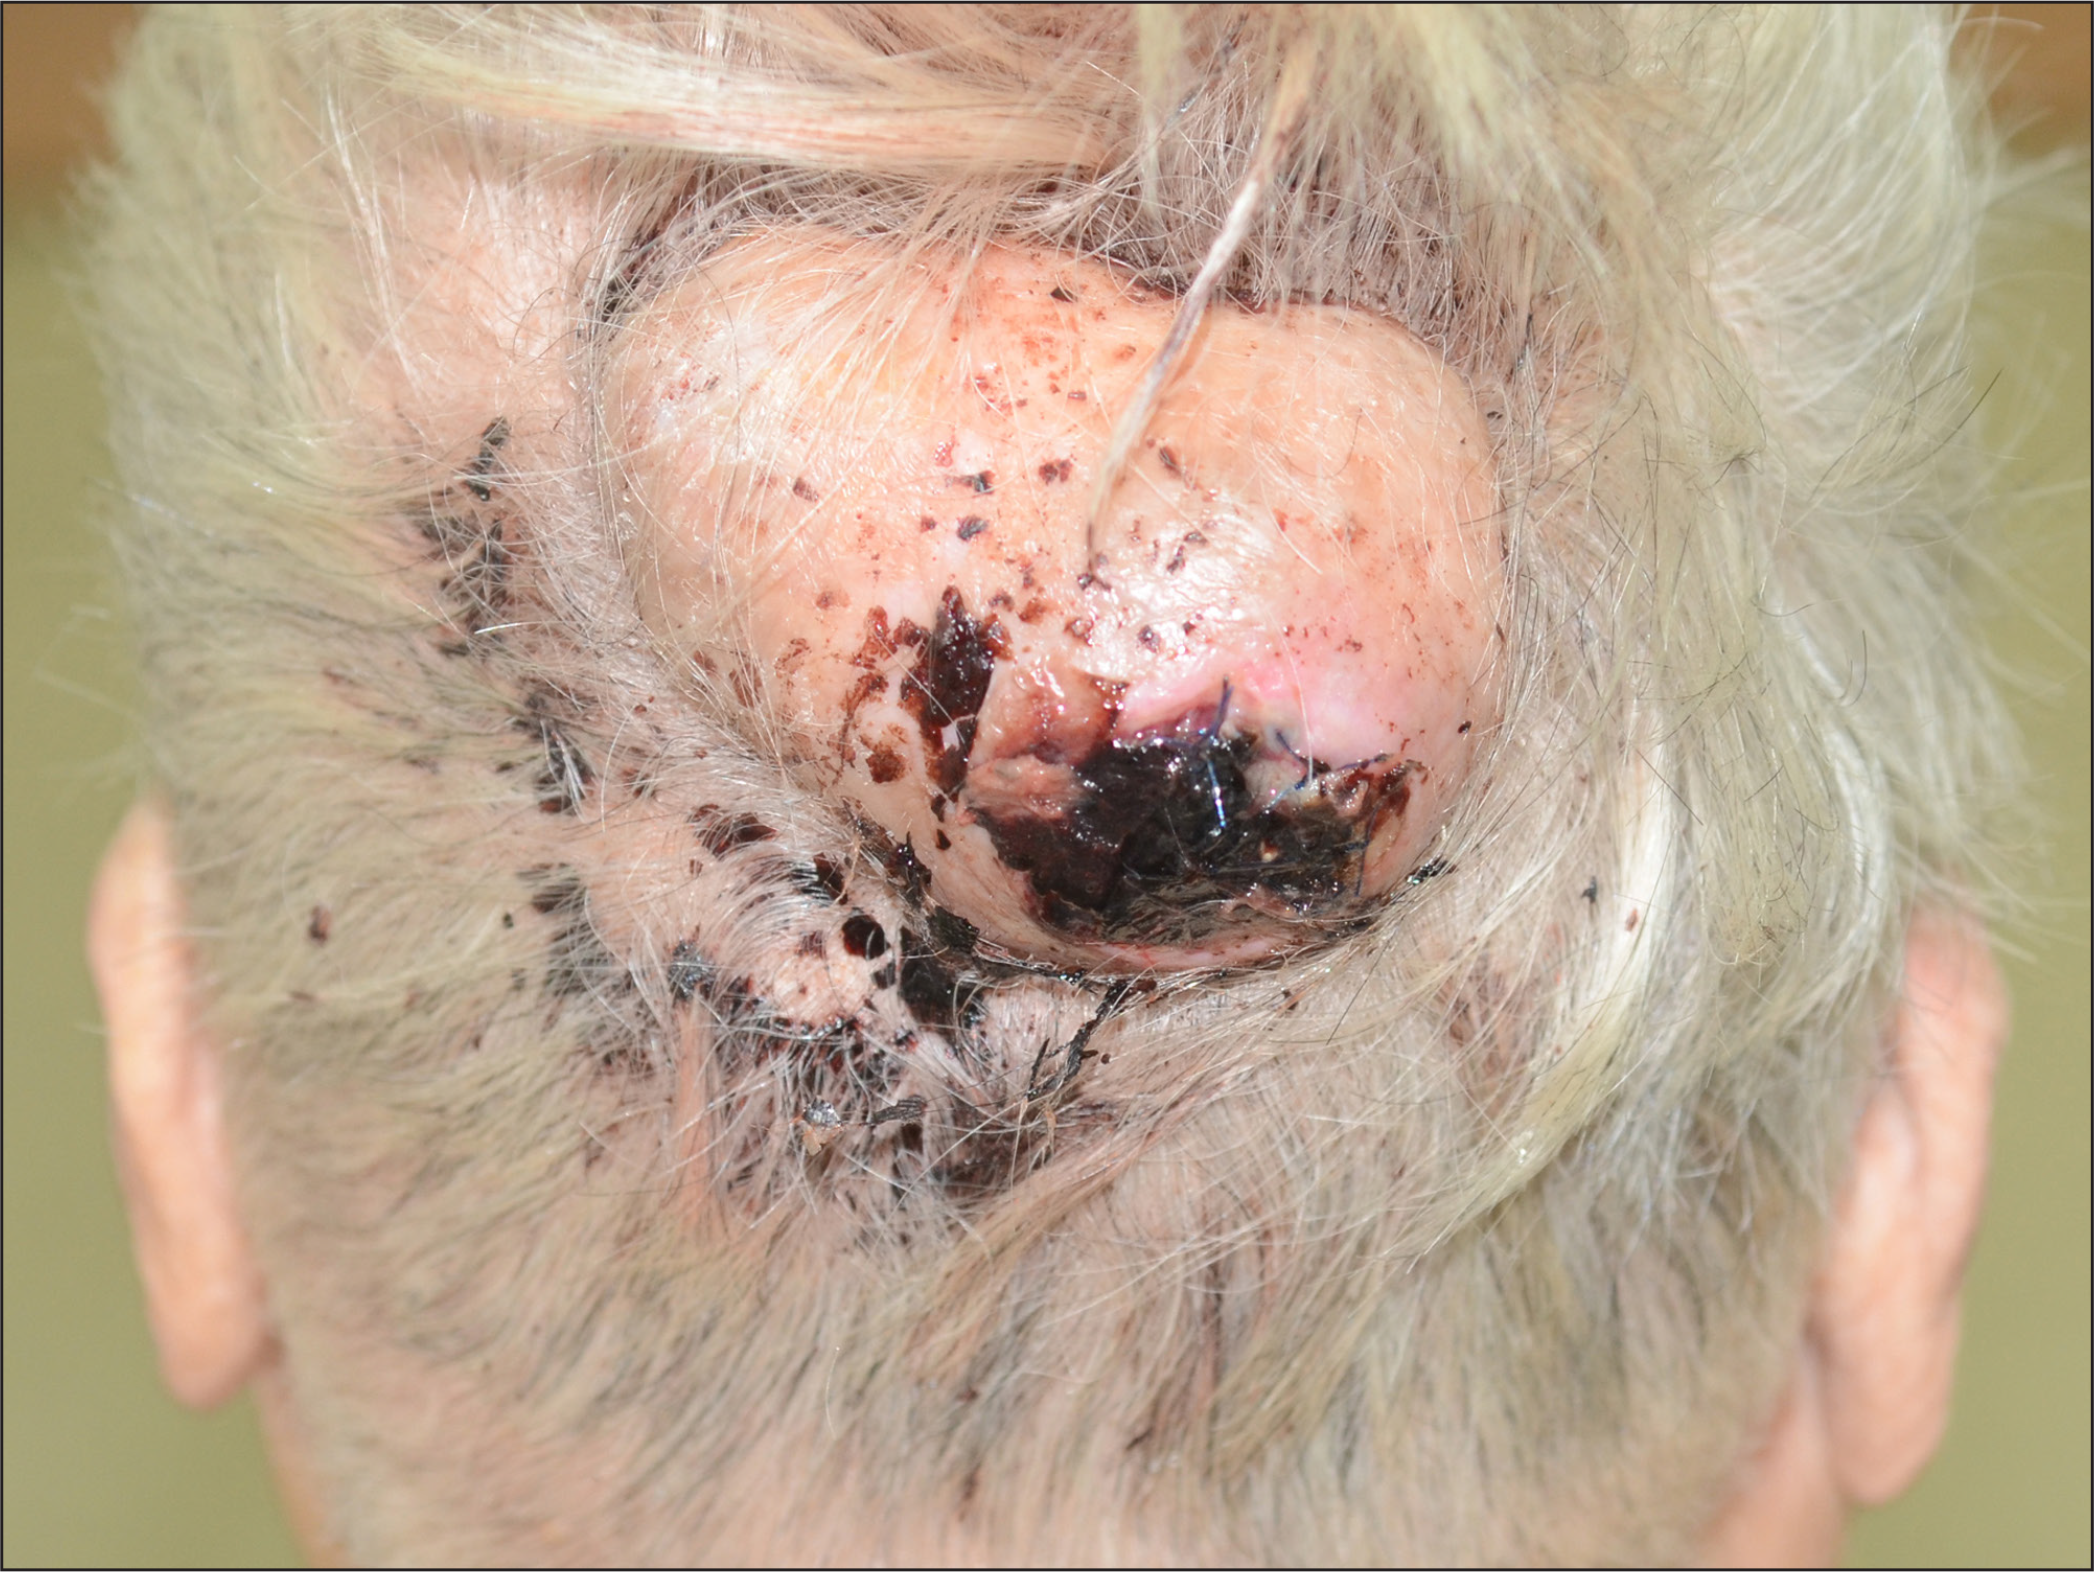 A flesh-coloured, dome-shaped mass (8 × 5 × 3.5 cm) with ulceration and haemorrhagic crusting in the occipital region